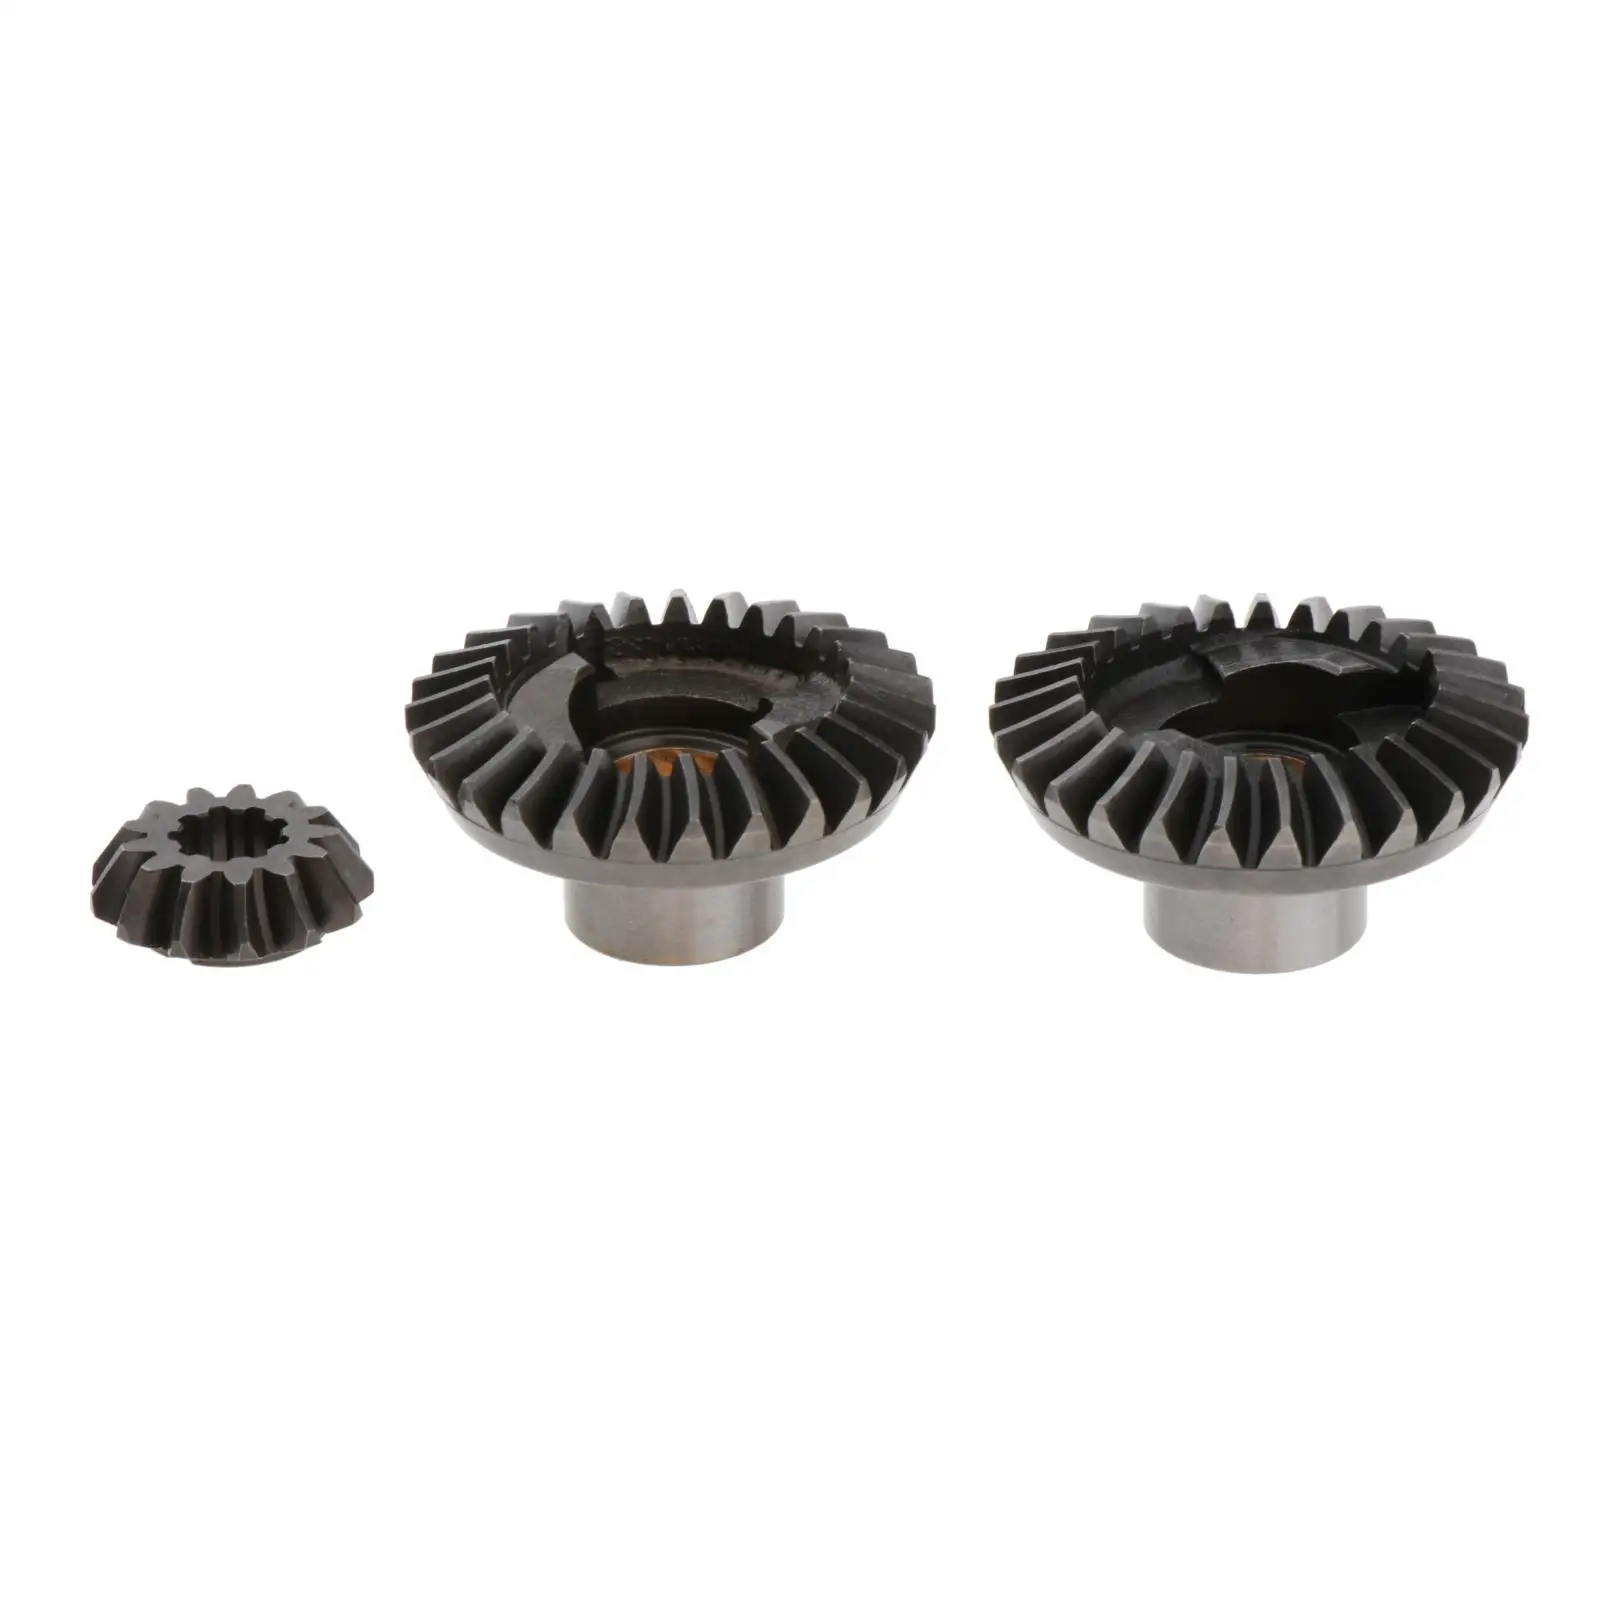 3pcs Gear Set Forward Reverse Pinion for Yamaha Outboard F4 4 stroke 4HP boat engine, Easy to Replace